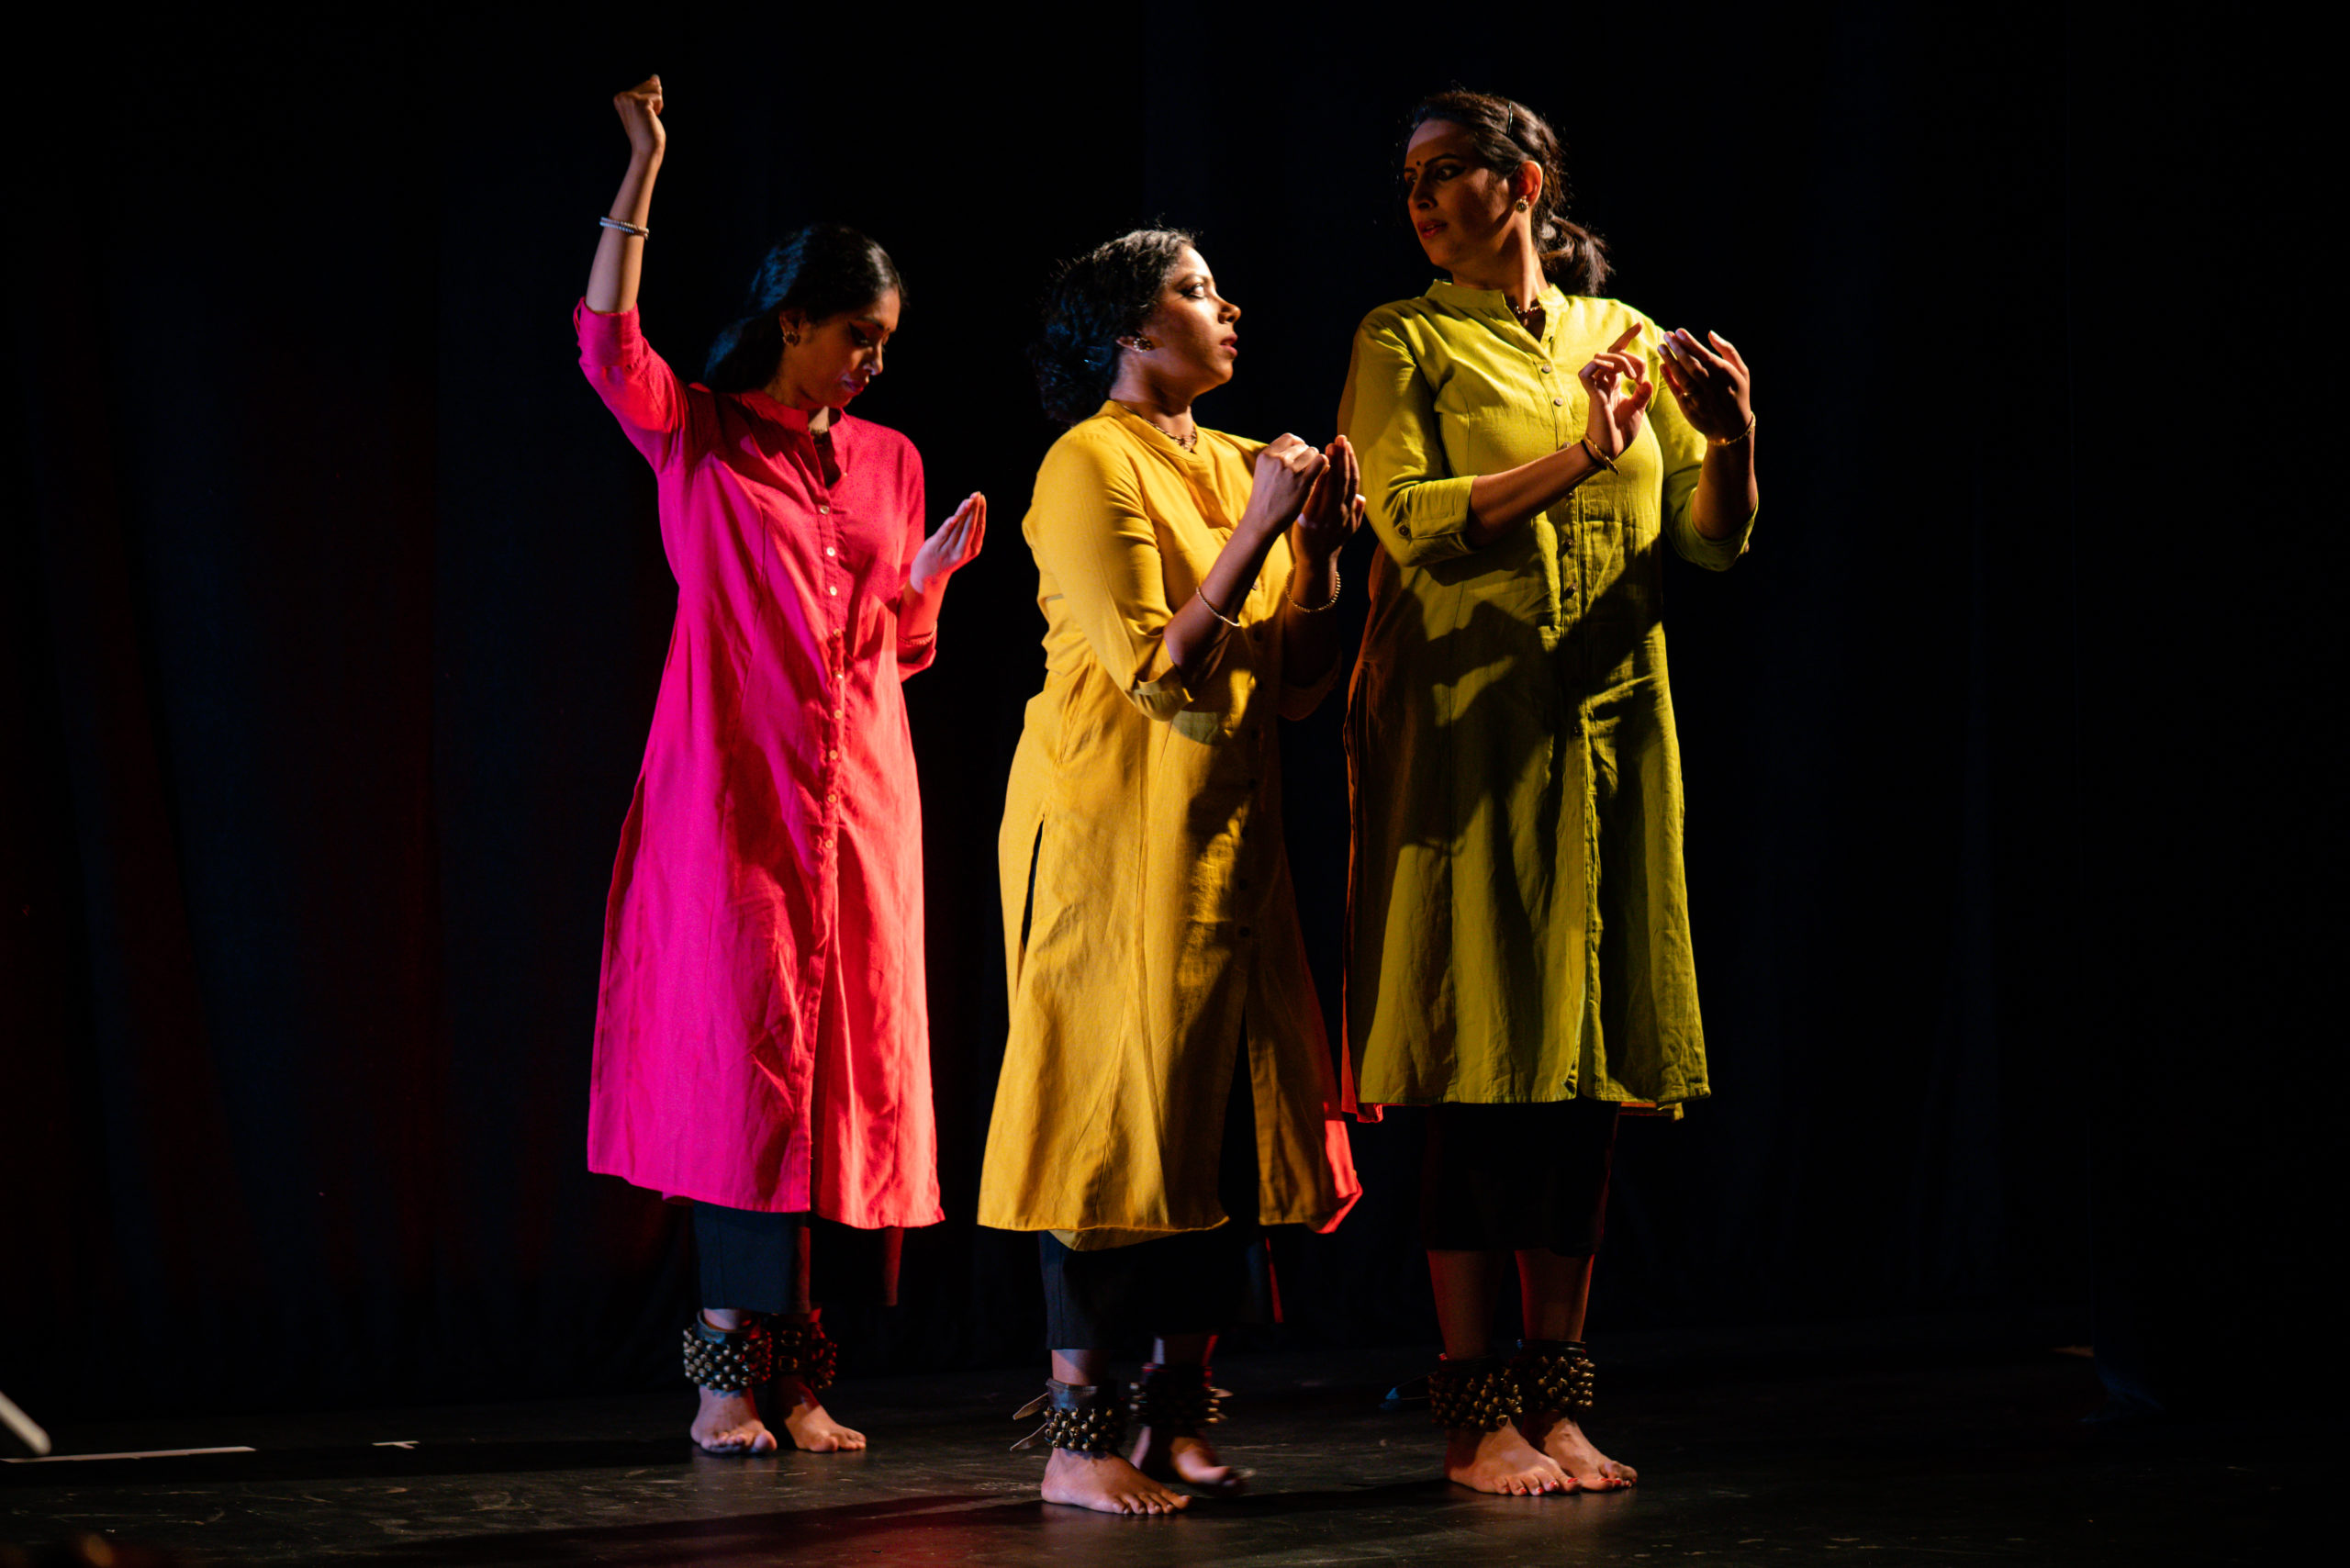 Three dancers in bright pink, yellow, and green stand close together onstage in a bharatanatyam performance